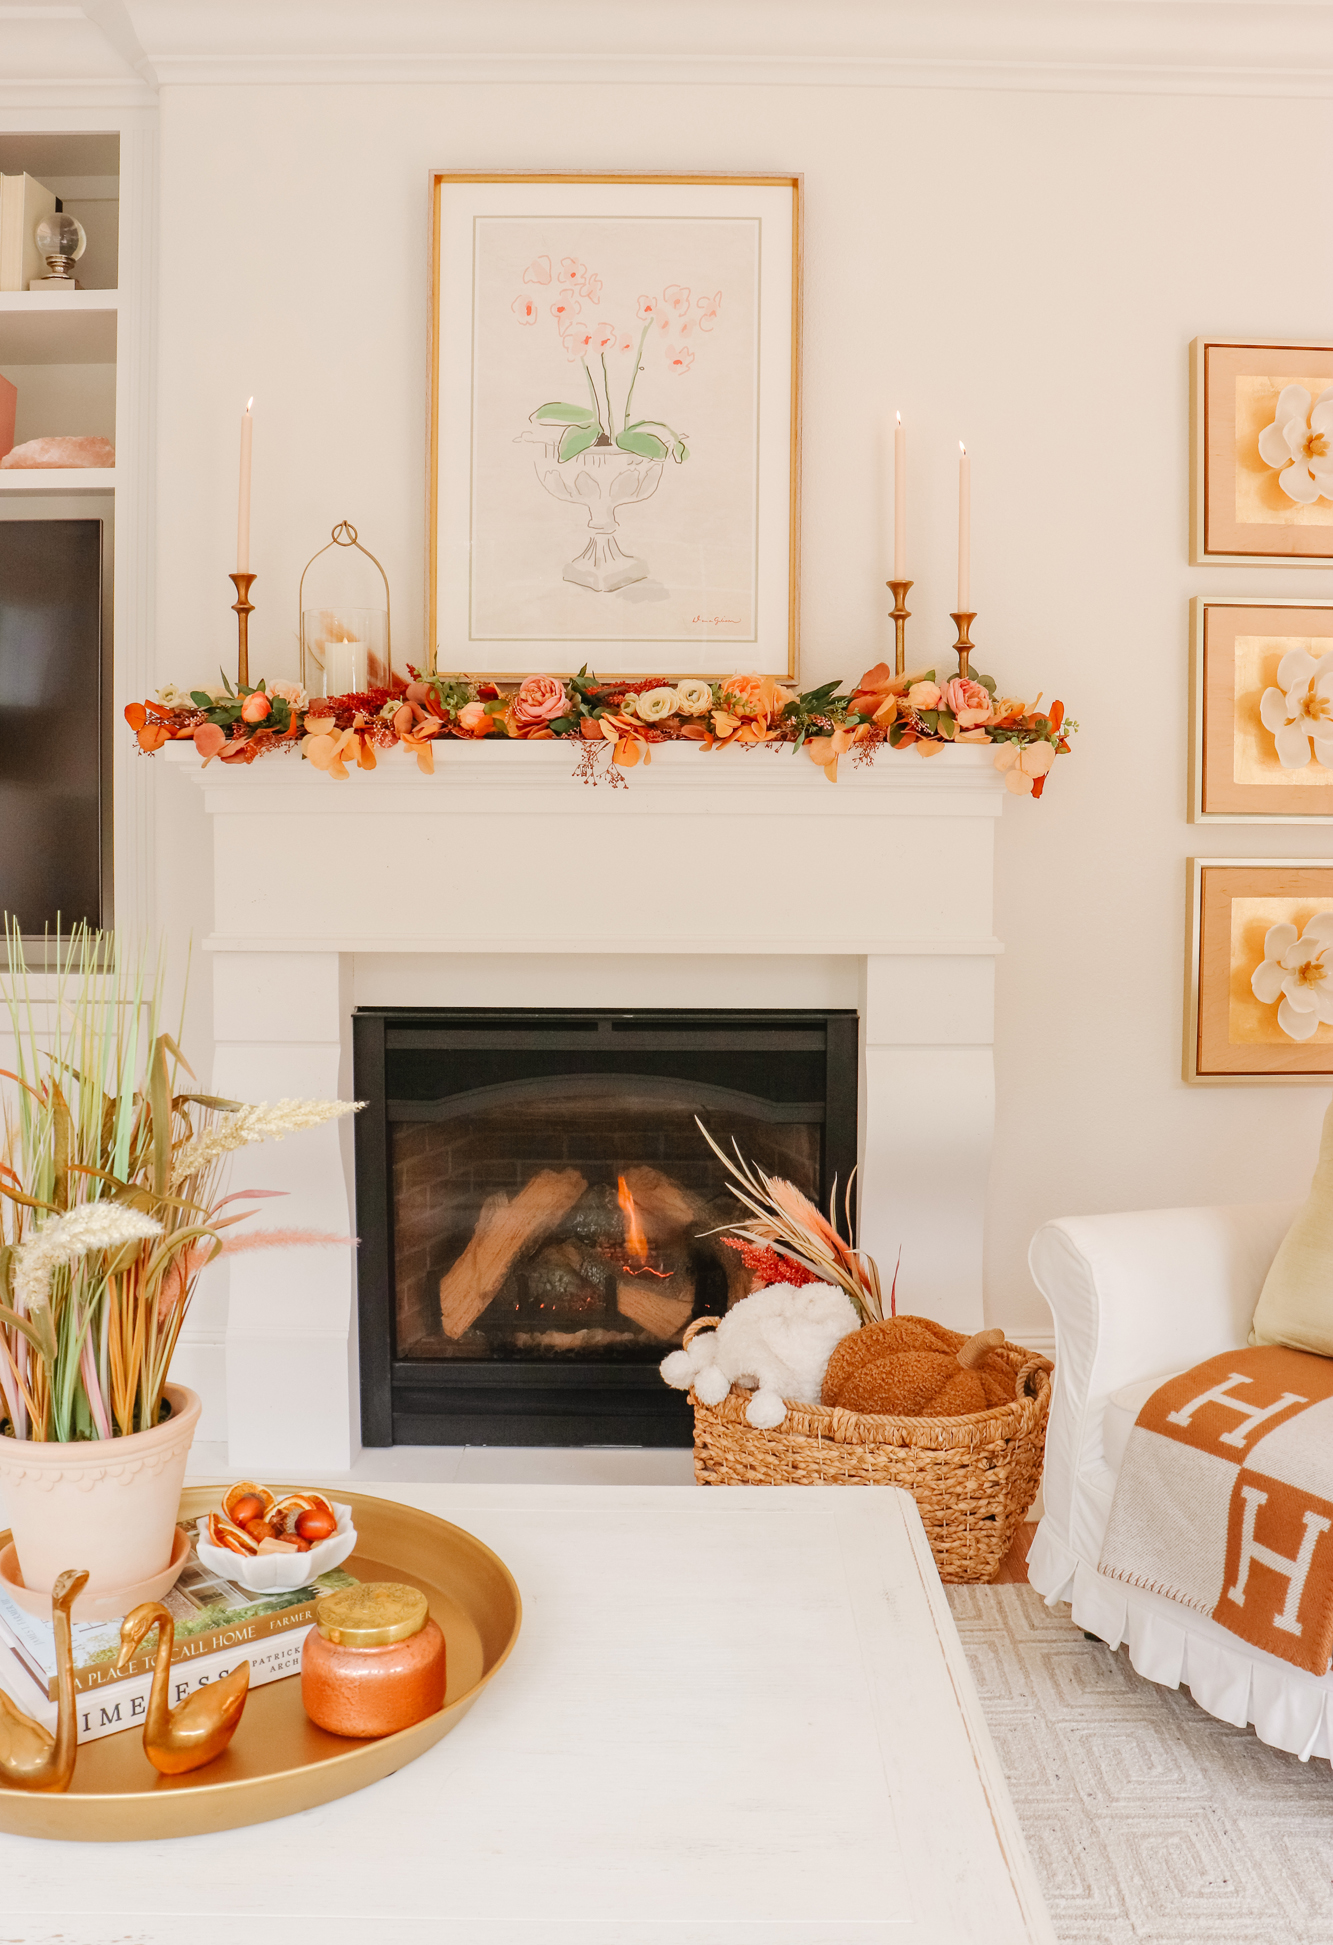 Easy Fall Mantel Decor Ideas - Simple and Affordable Autumn Mantel Look that takes minimal effort. Looks beautiful and is so fun for the cozy season. 